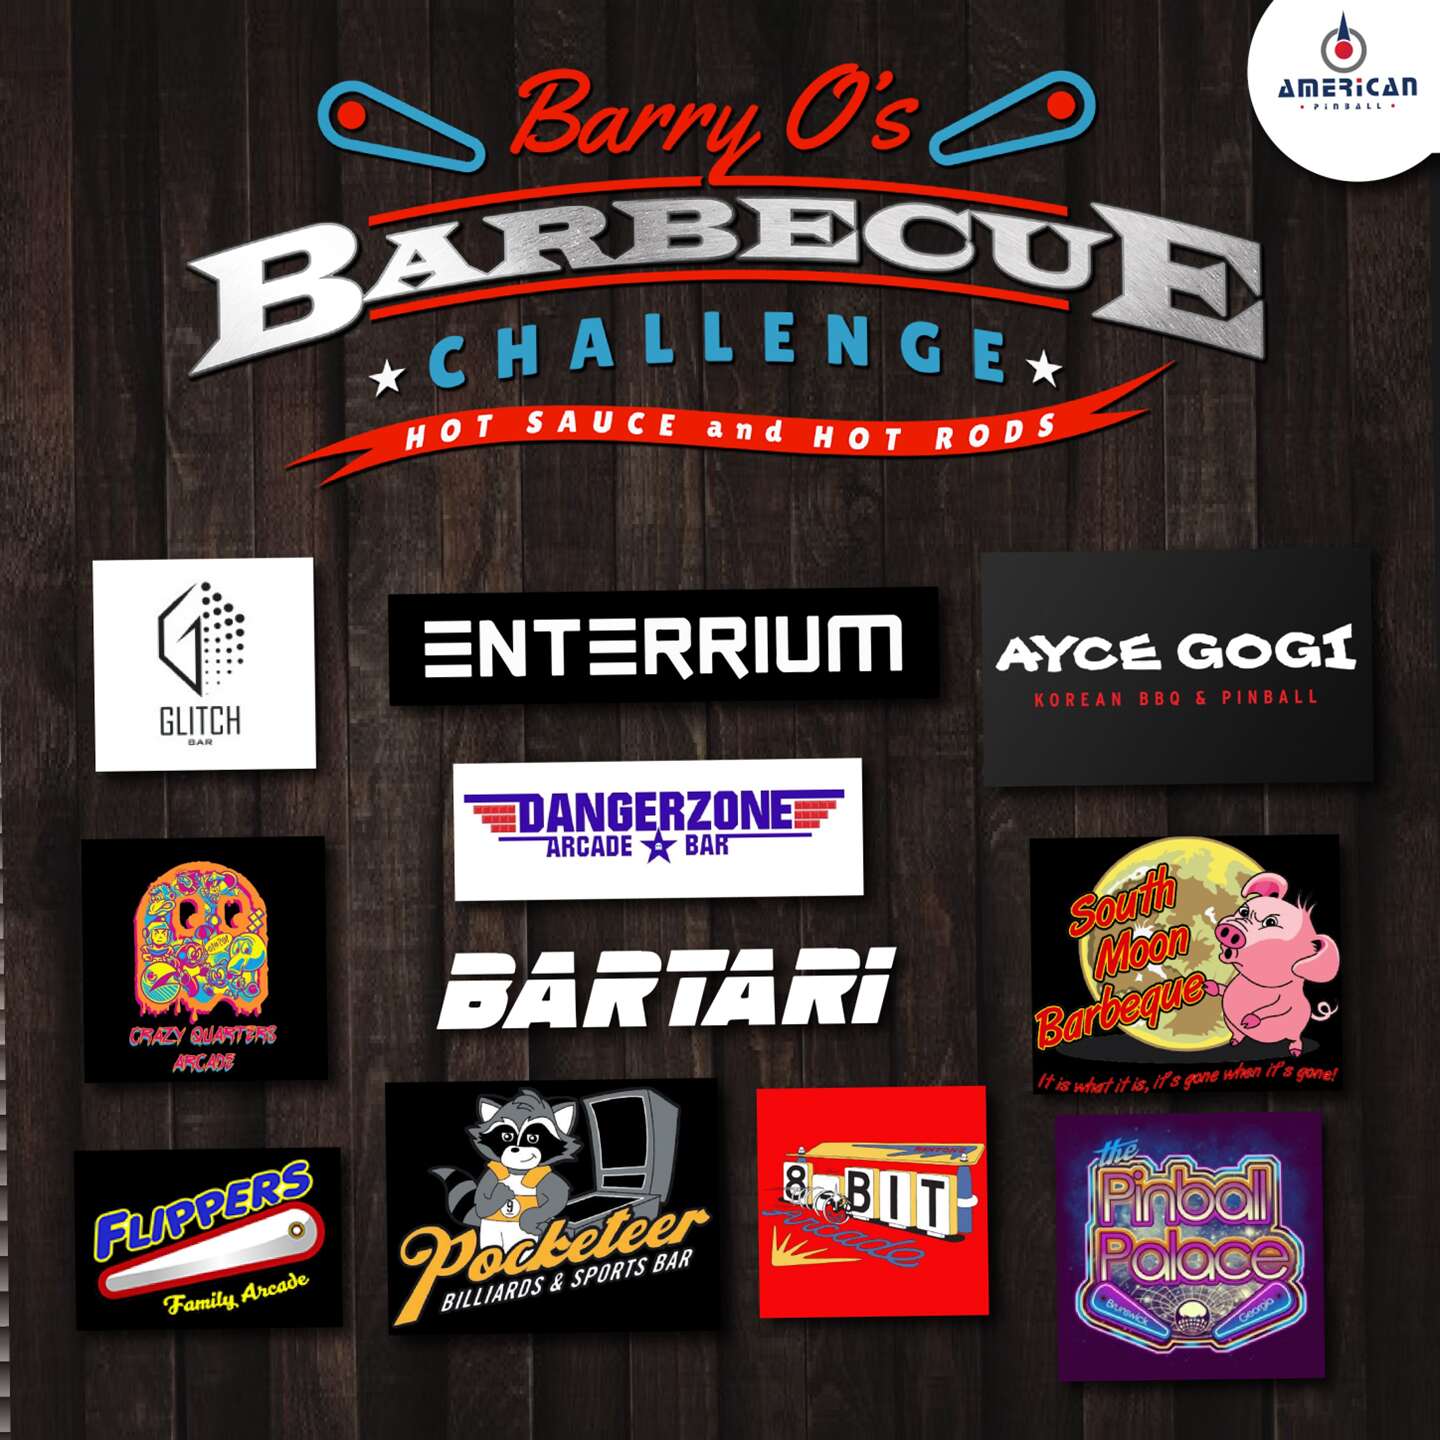 Barry O's Barbecue Challenge Hot Sauce and Hot Rods